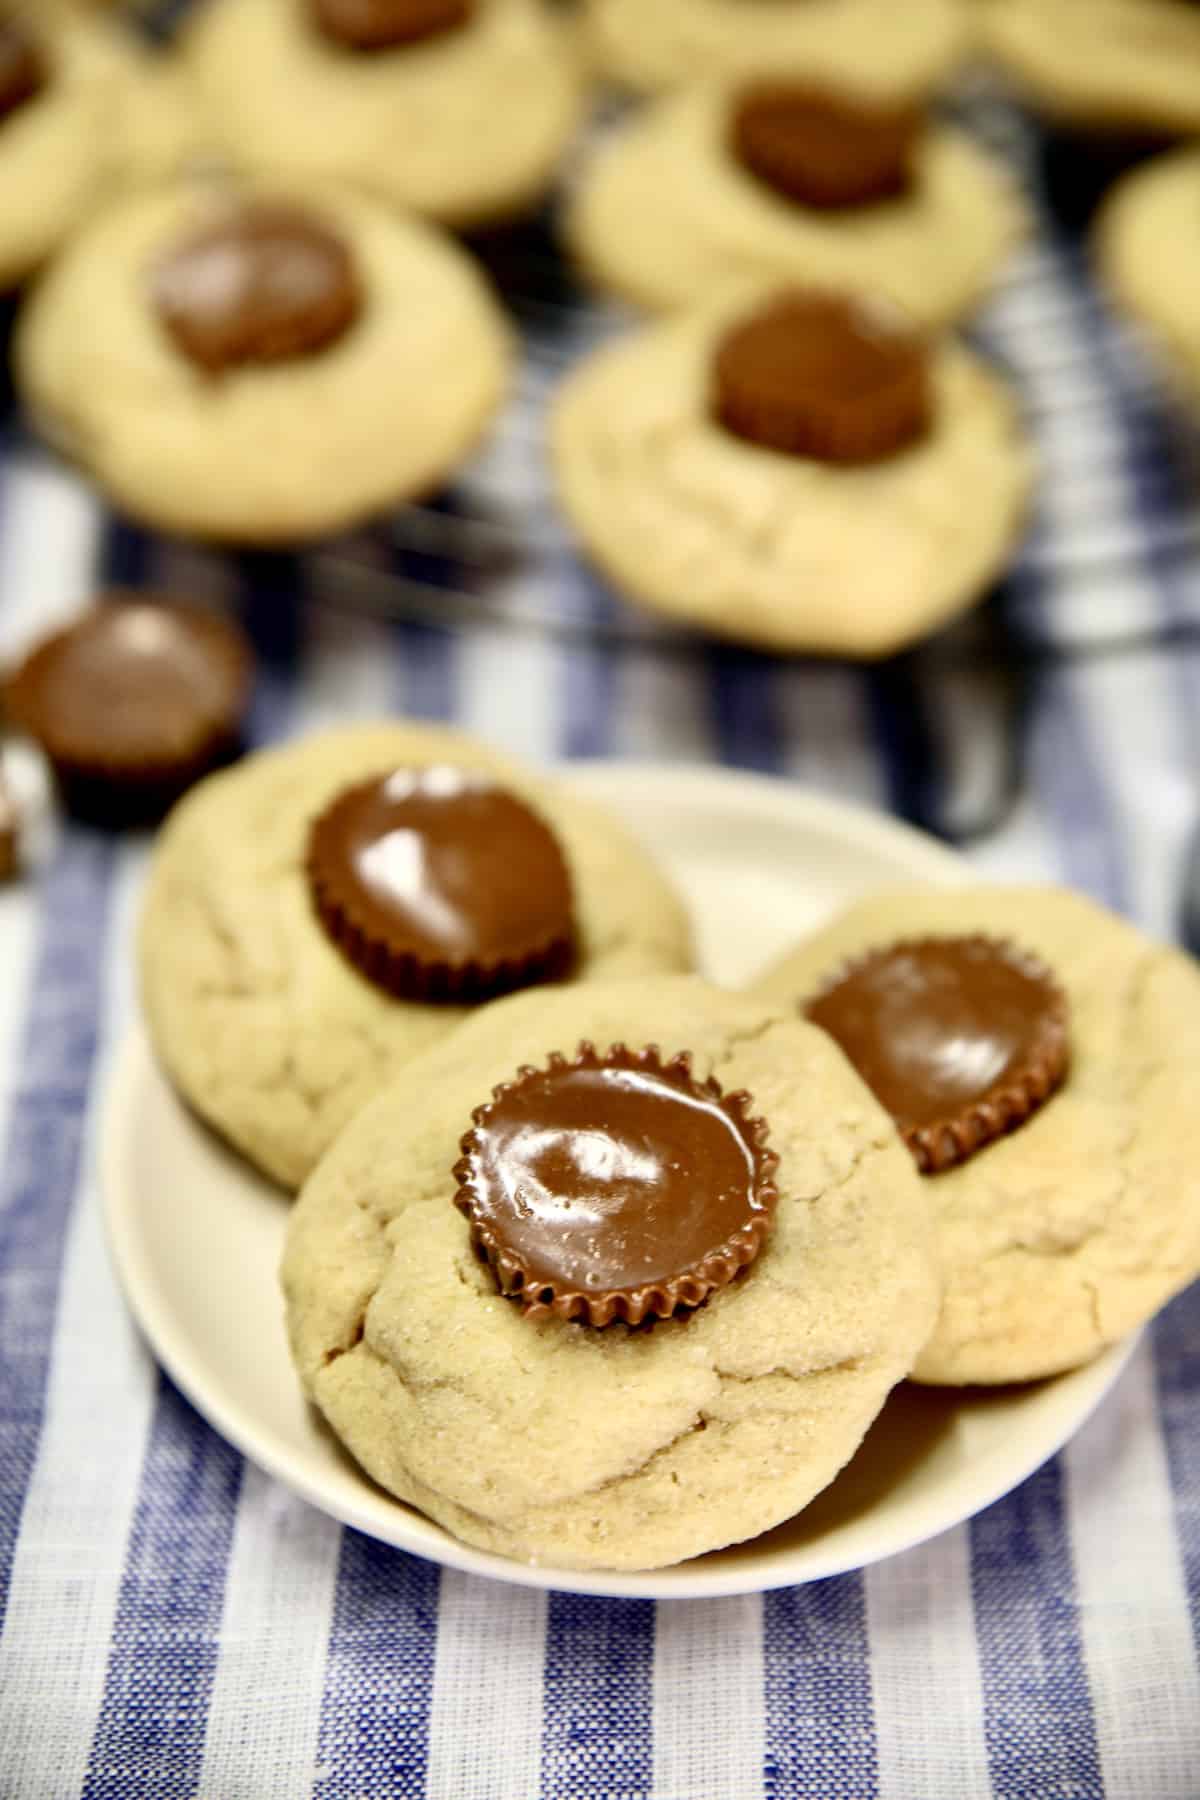 Peanut Butter Cup cookies on a plate with rack of cookies.